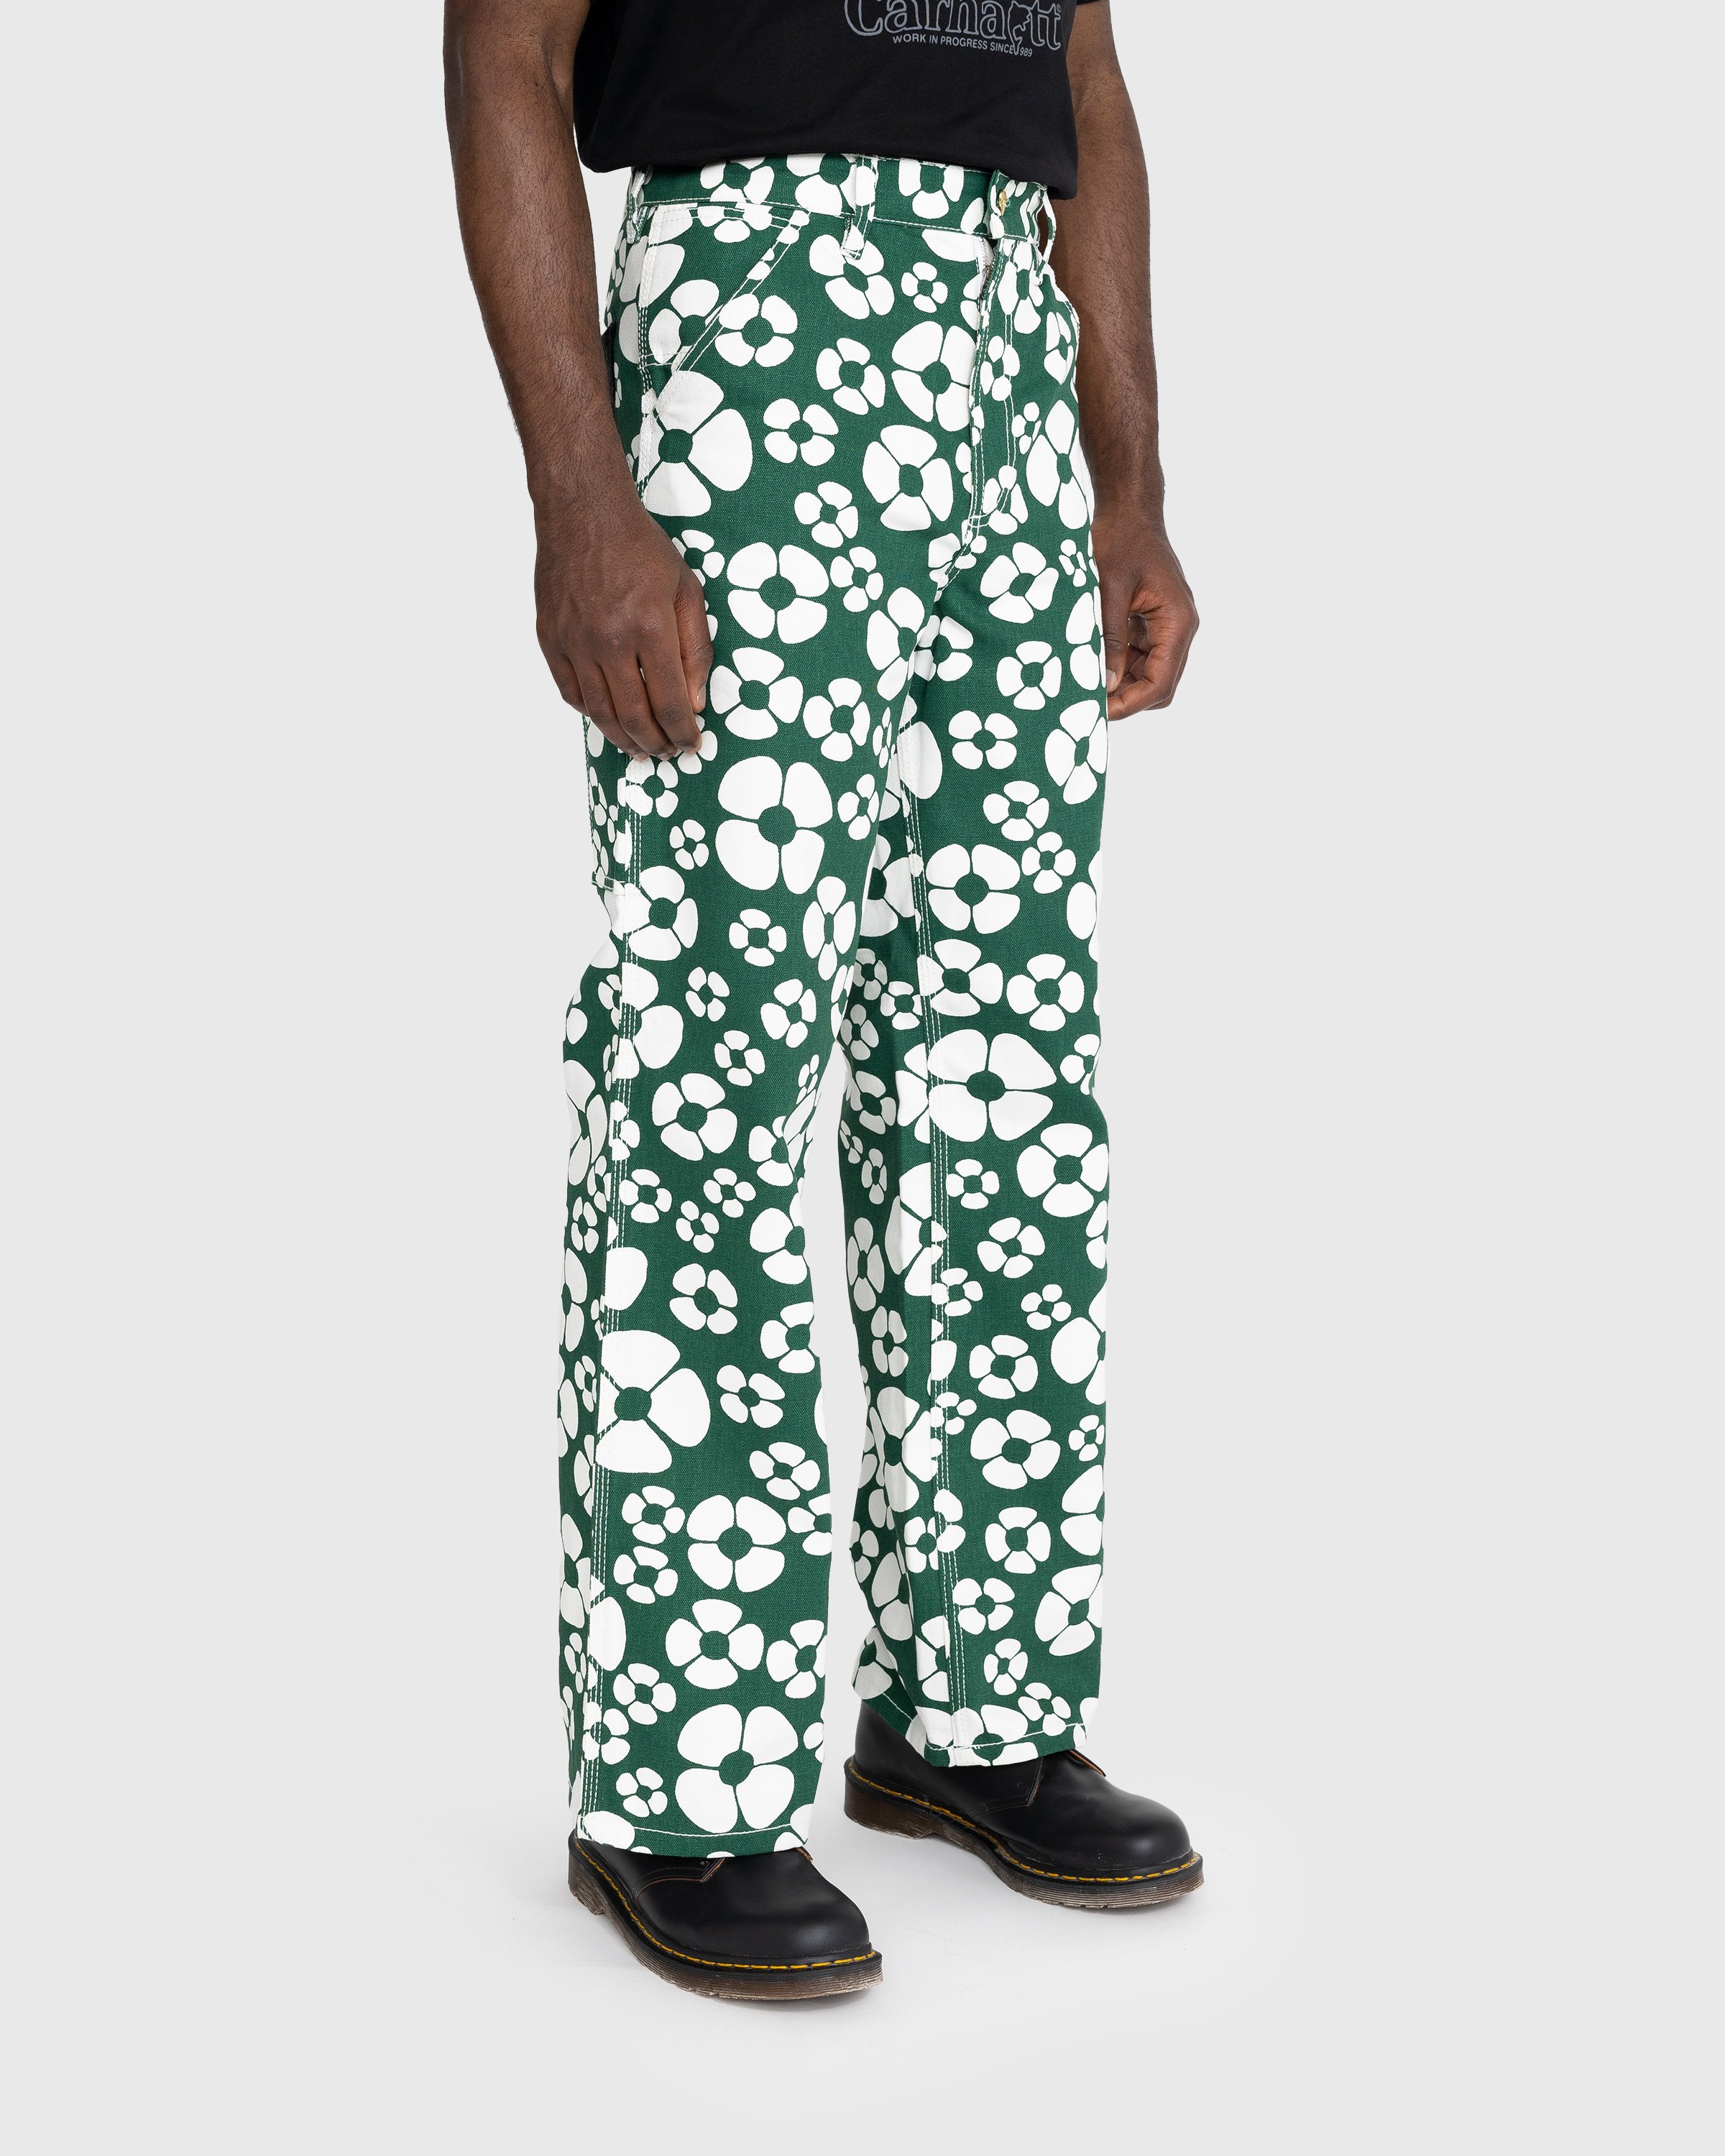 Marni x Carhartt WIP - Floral Trousers Green - Clothing - Green - Image 3